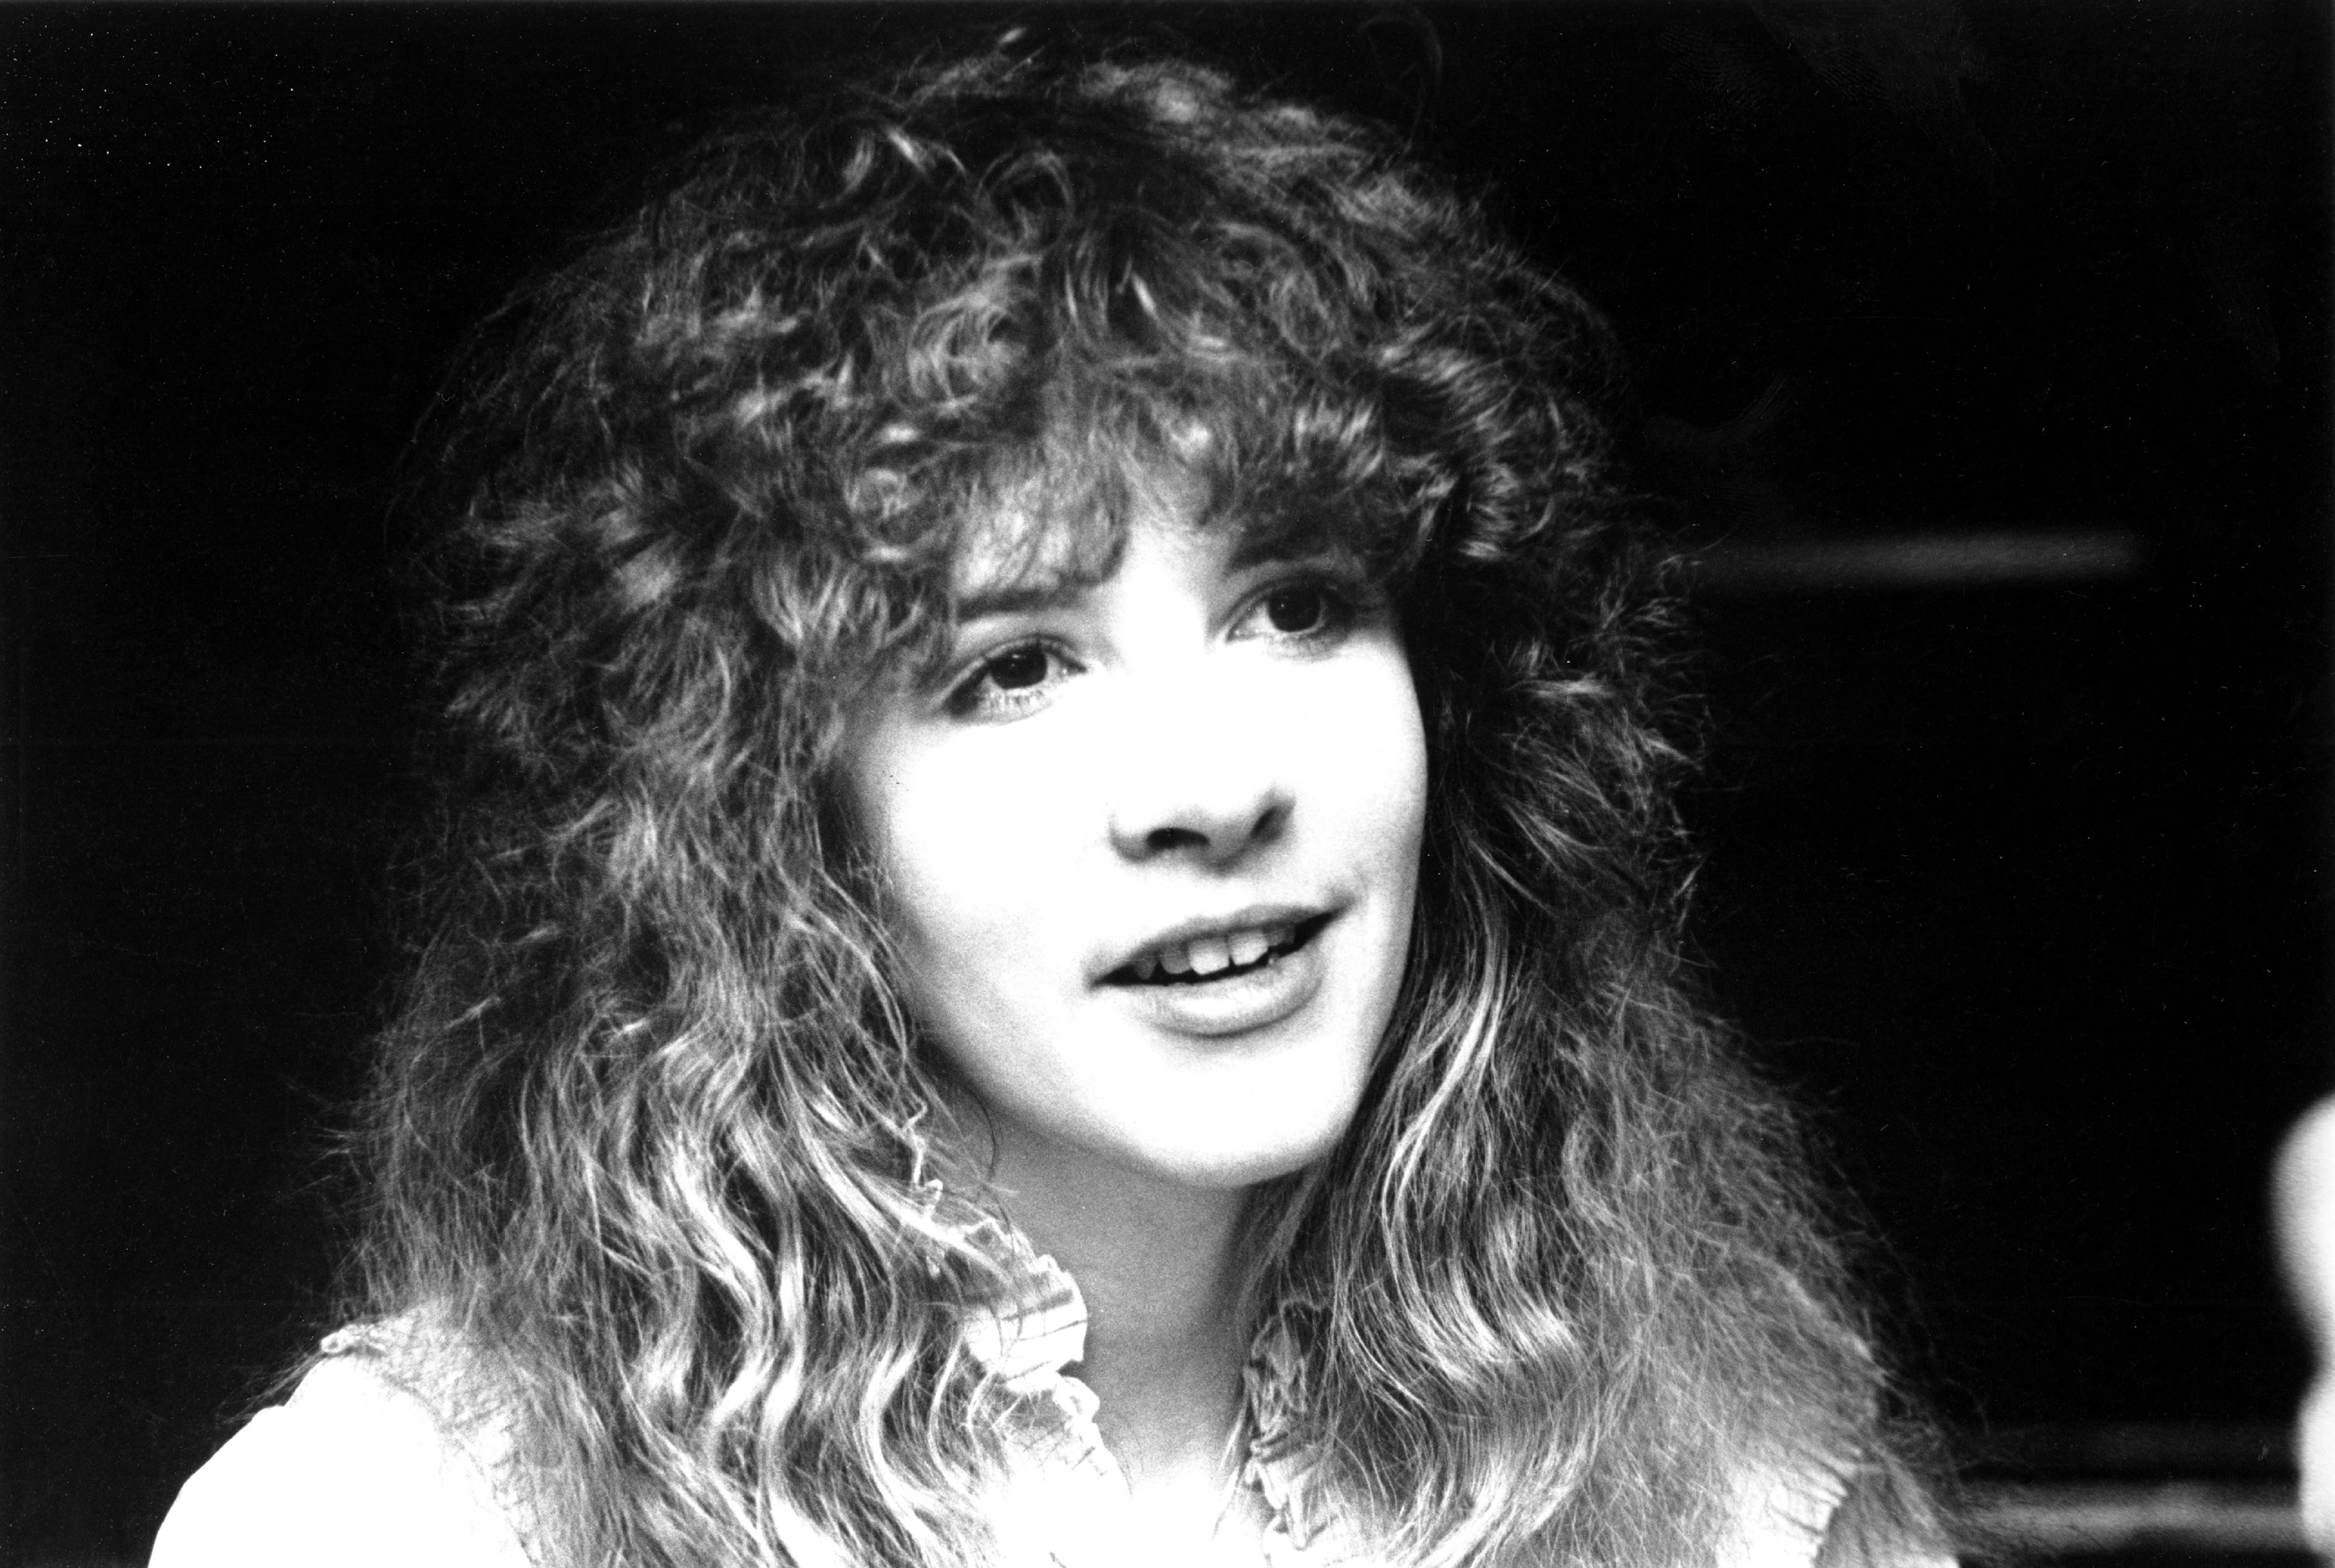 A black and white photo of Stevie Nicks wearing a ruffled white shirt.